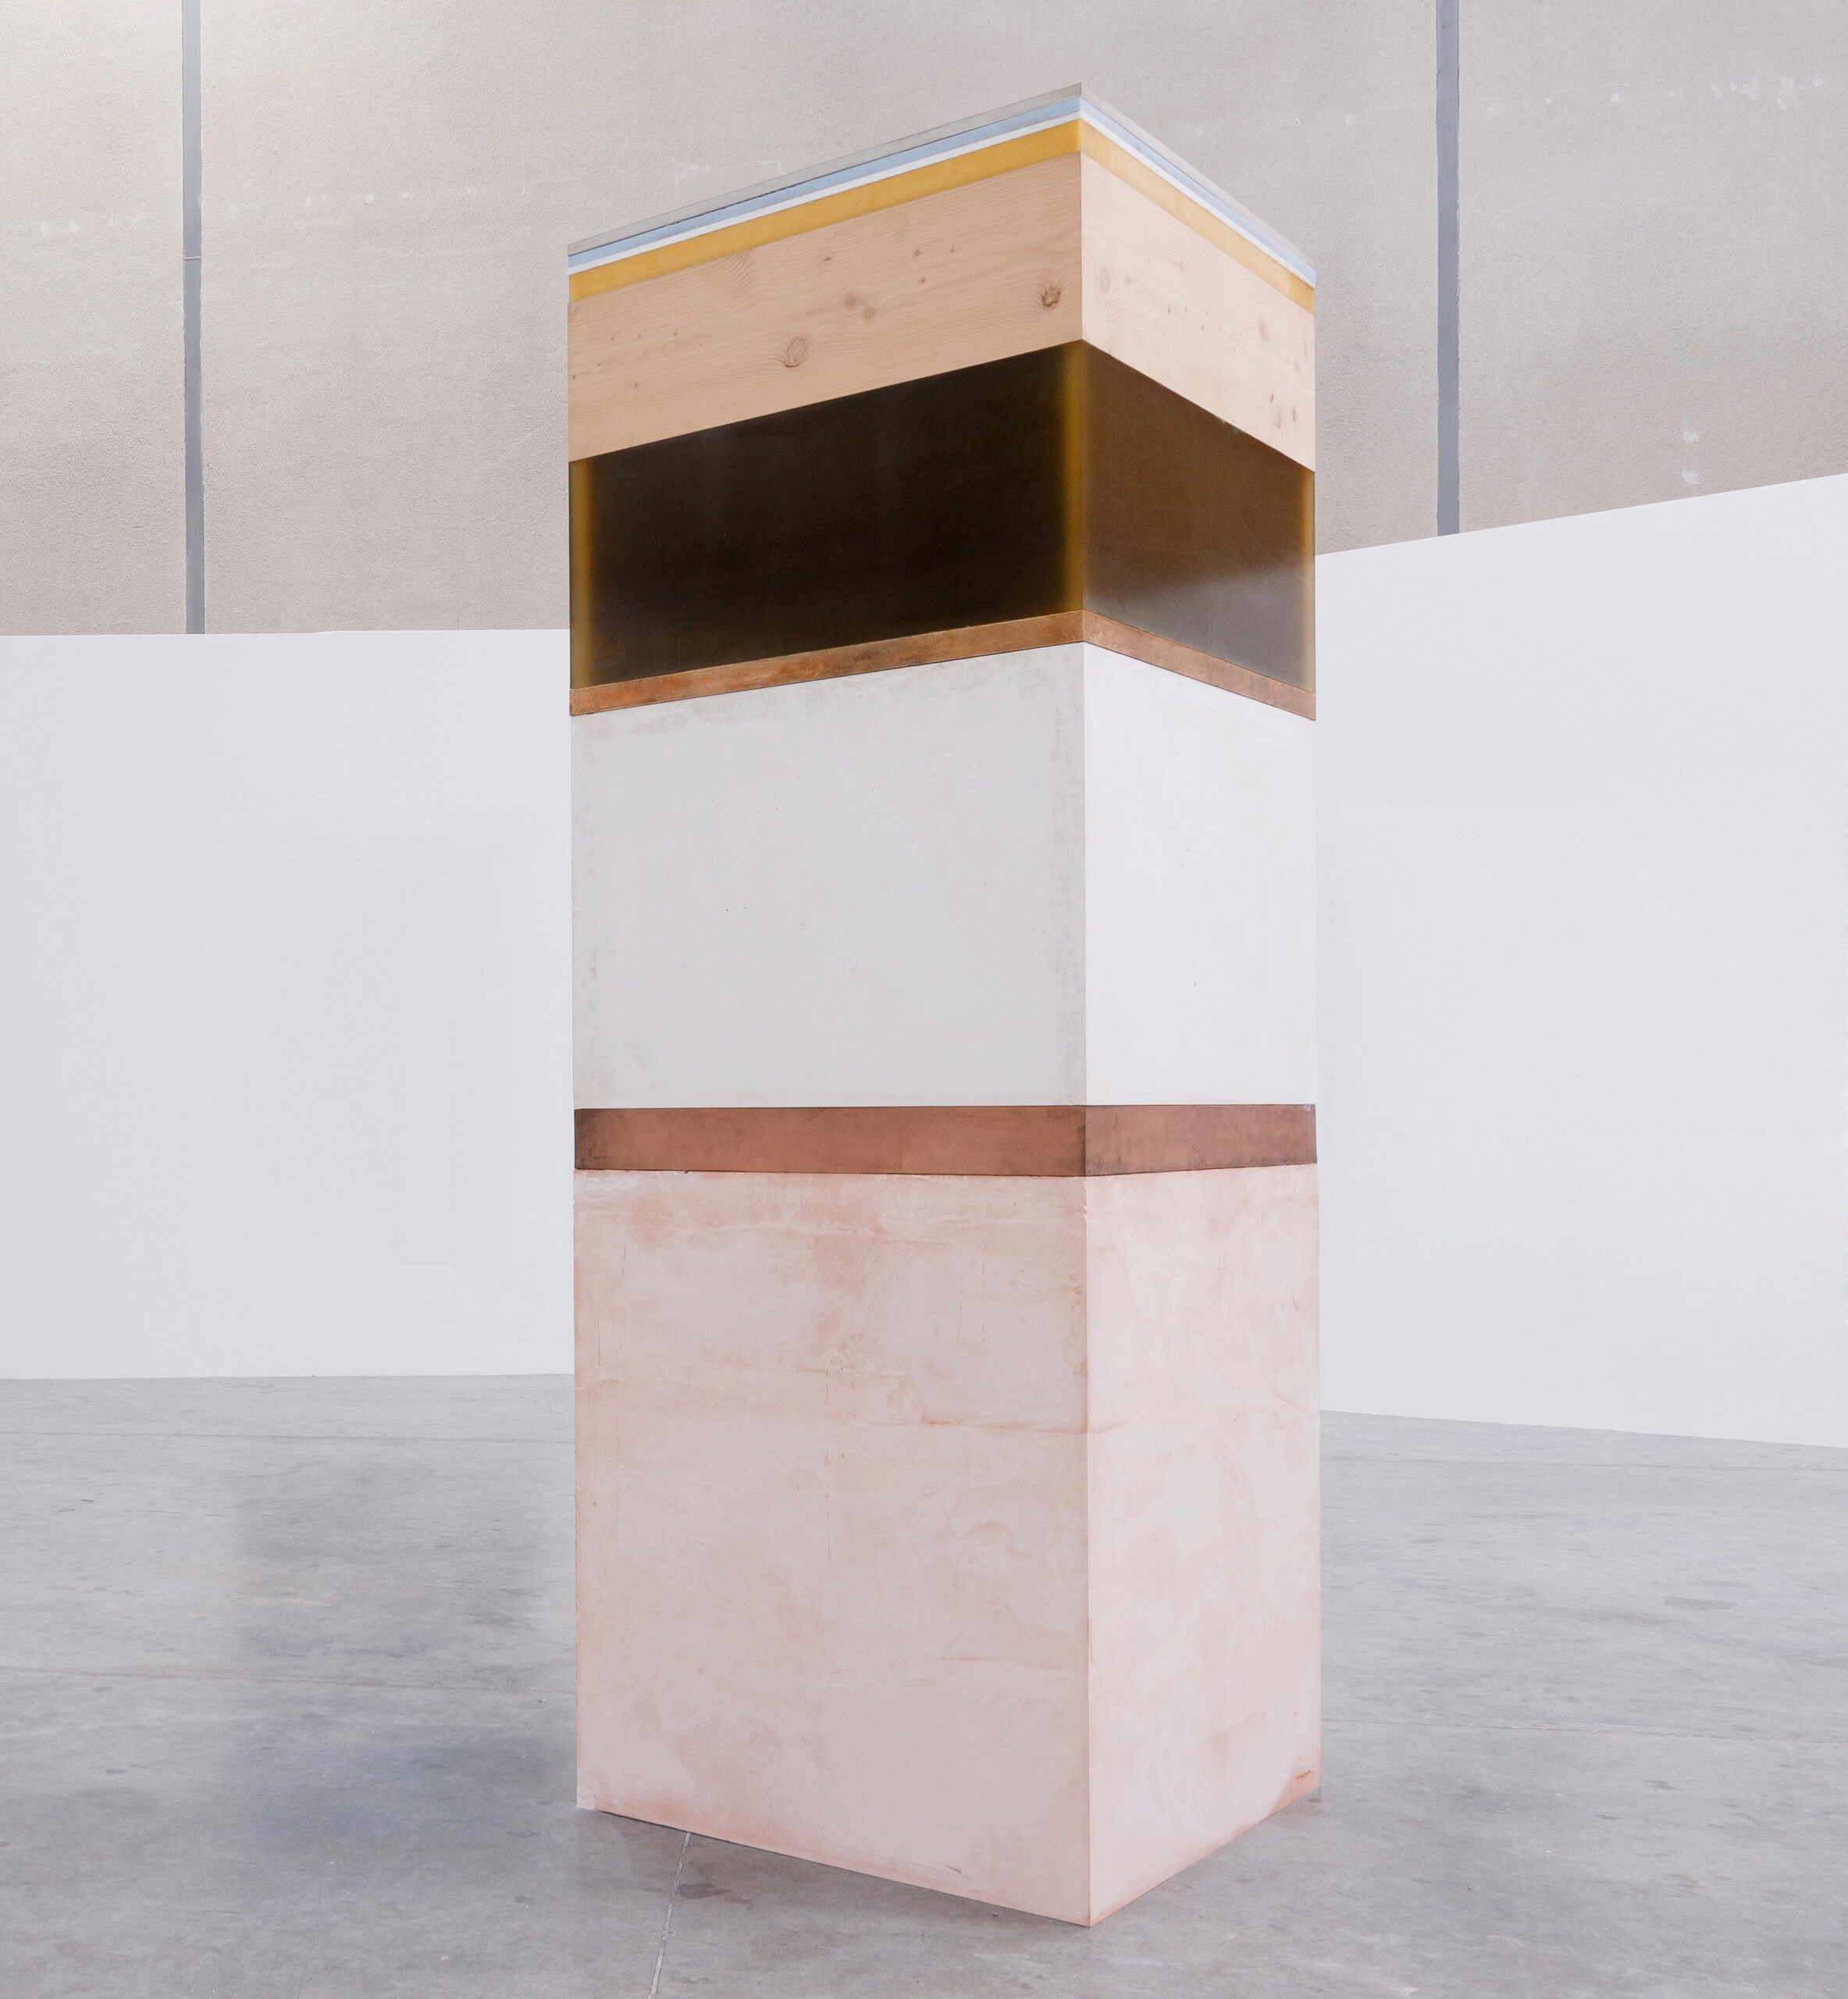 Shaikha Al Mazrou,Scales, 2017, Chamotte clay, Copper, Plaster, Bronze, Resin, Cedar,Wood, Beeswax, Concrete, Silicon and Marble,300 x 100 x 100 cm, Courtesy Lawrie Shabibi and the artist